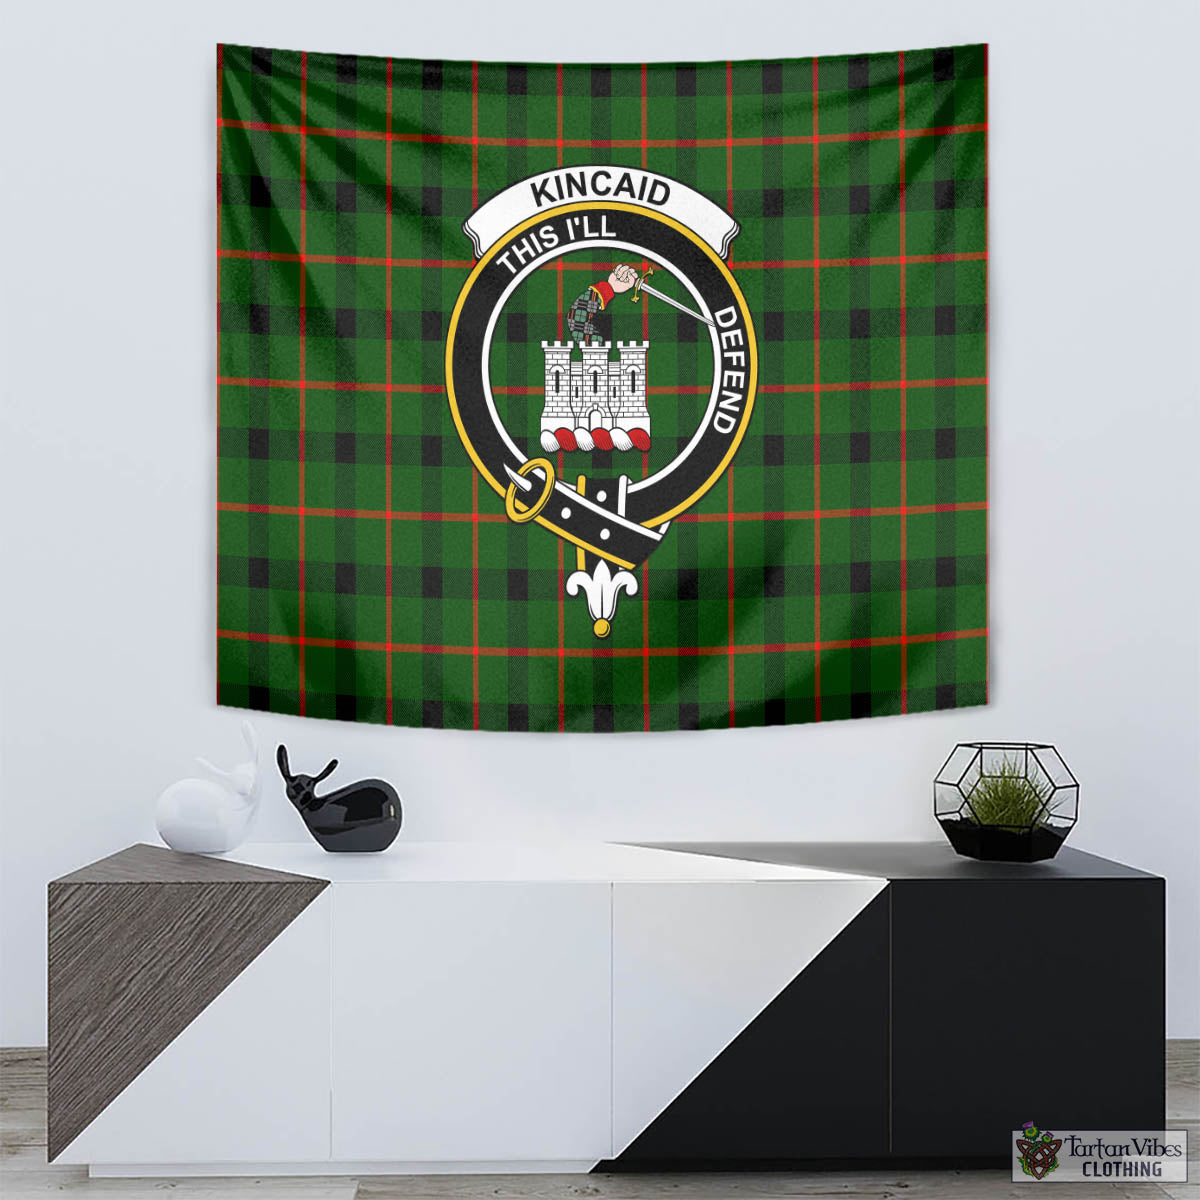 Tartan Vibes Clothing Kincaid Modern Tartan Tapestry Wall Hanging and Home Decor for Room with Family Crest